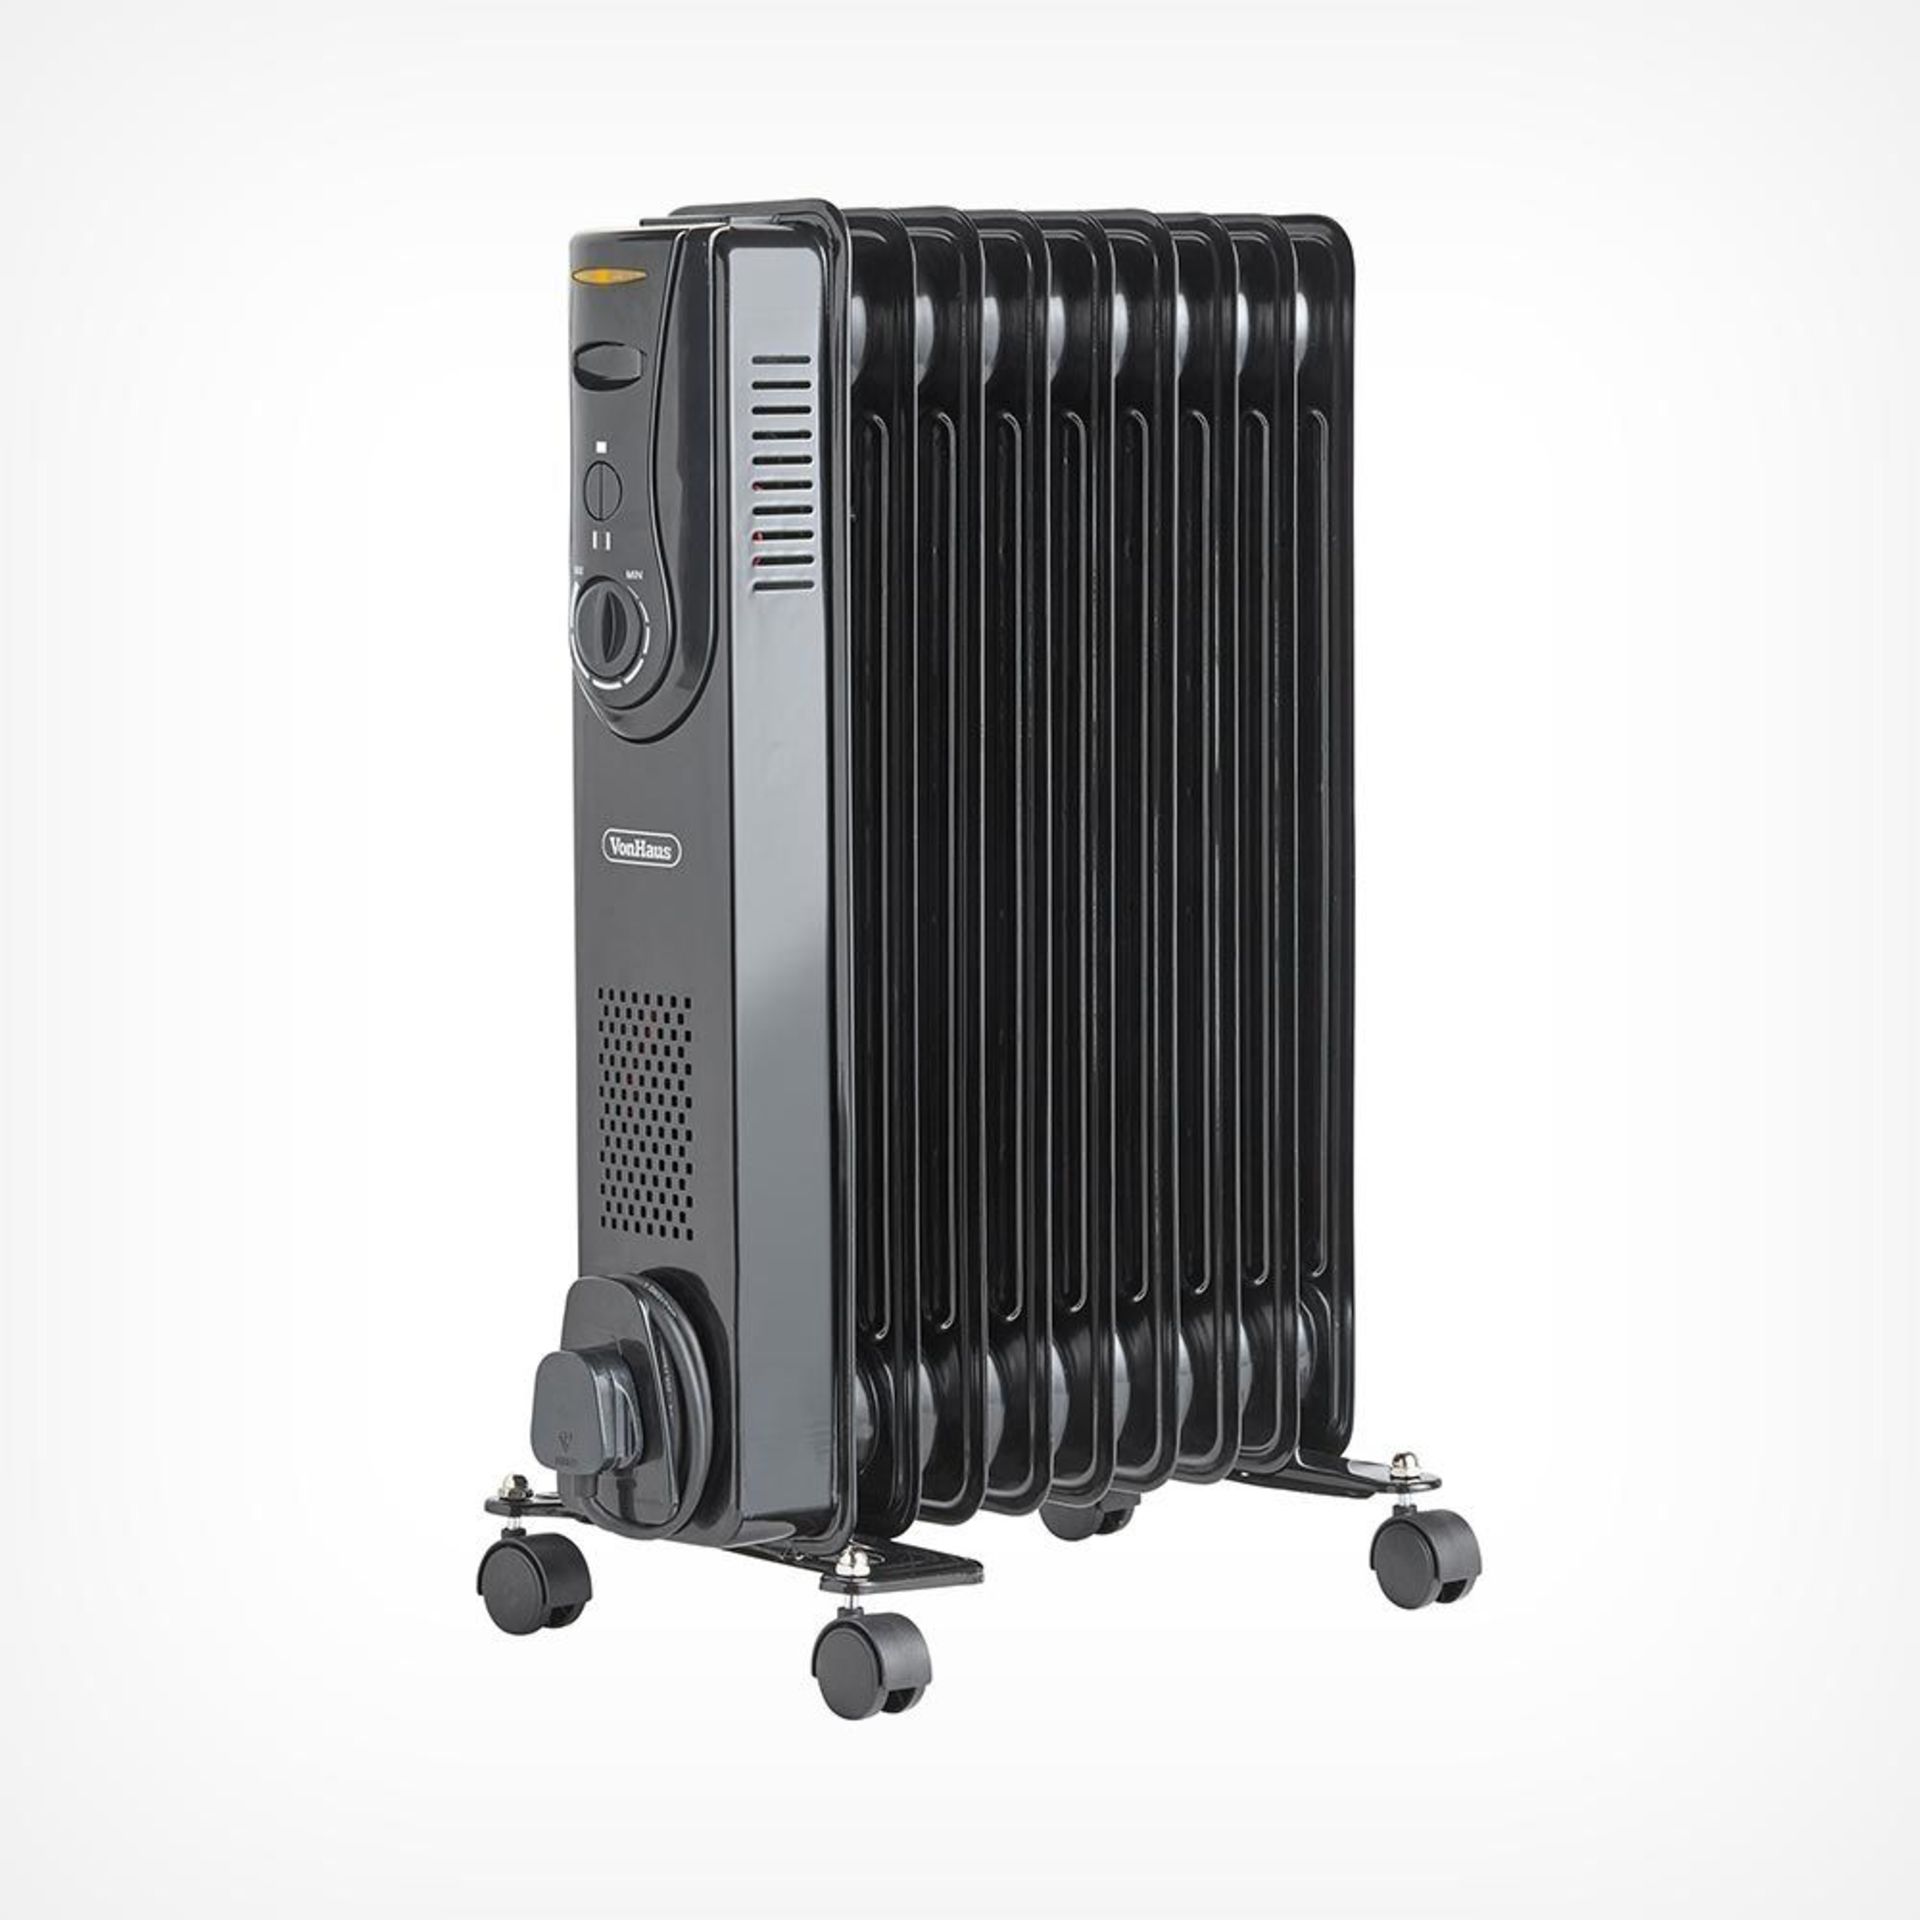 (CP107) 9 Fin 2000W Oil Filled Radiator - Black Powerful 2000W radiator with 9 oil-filled fins...